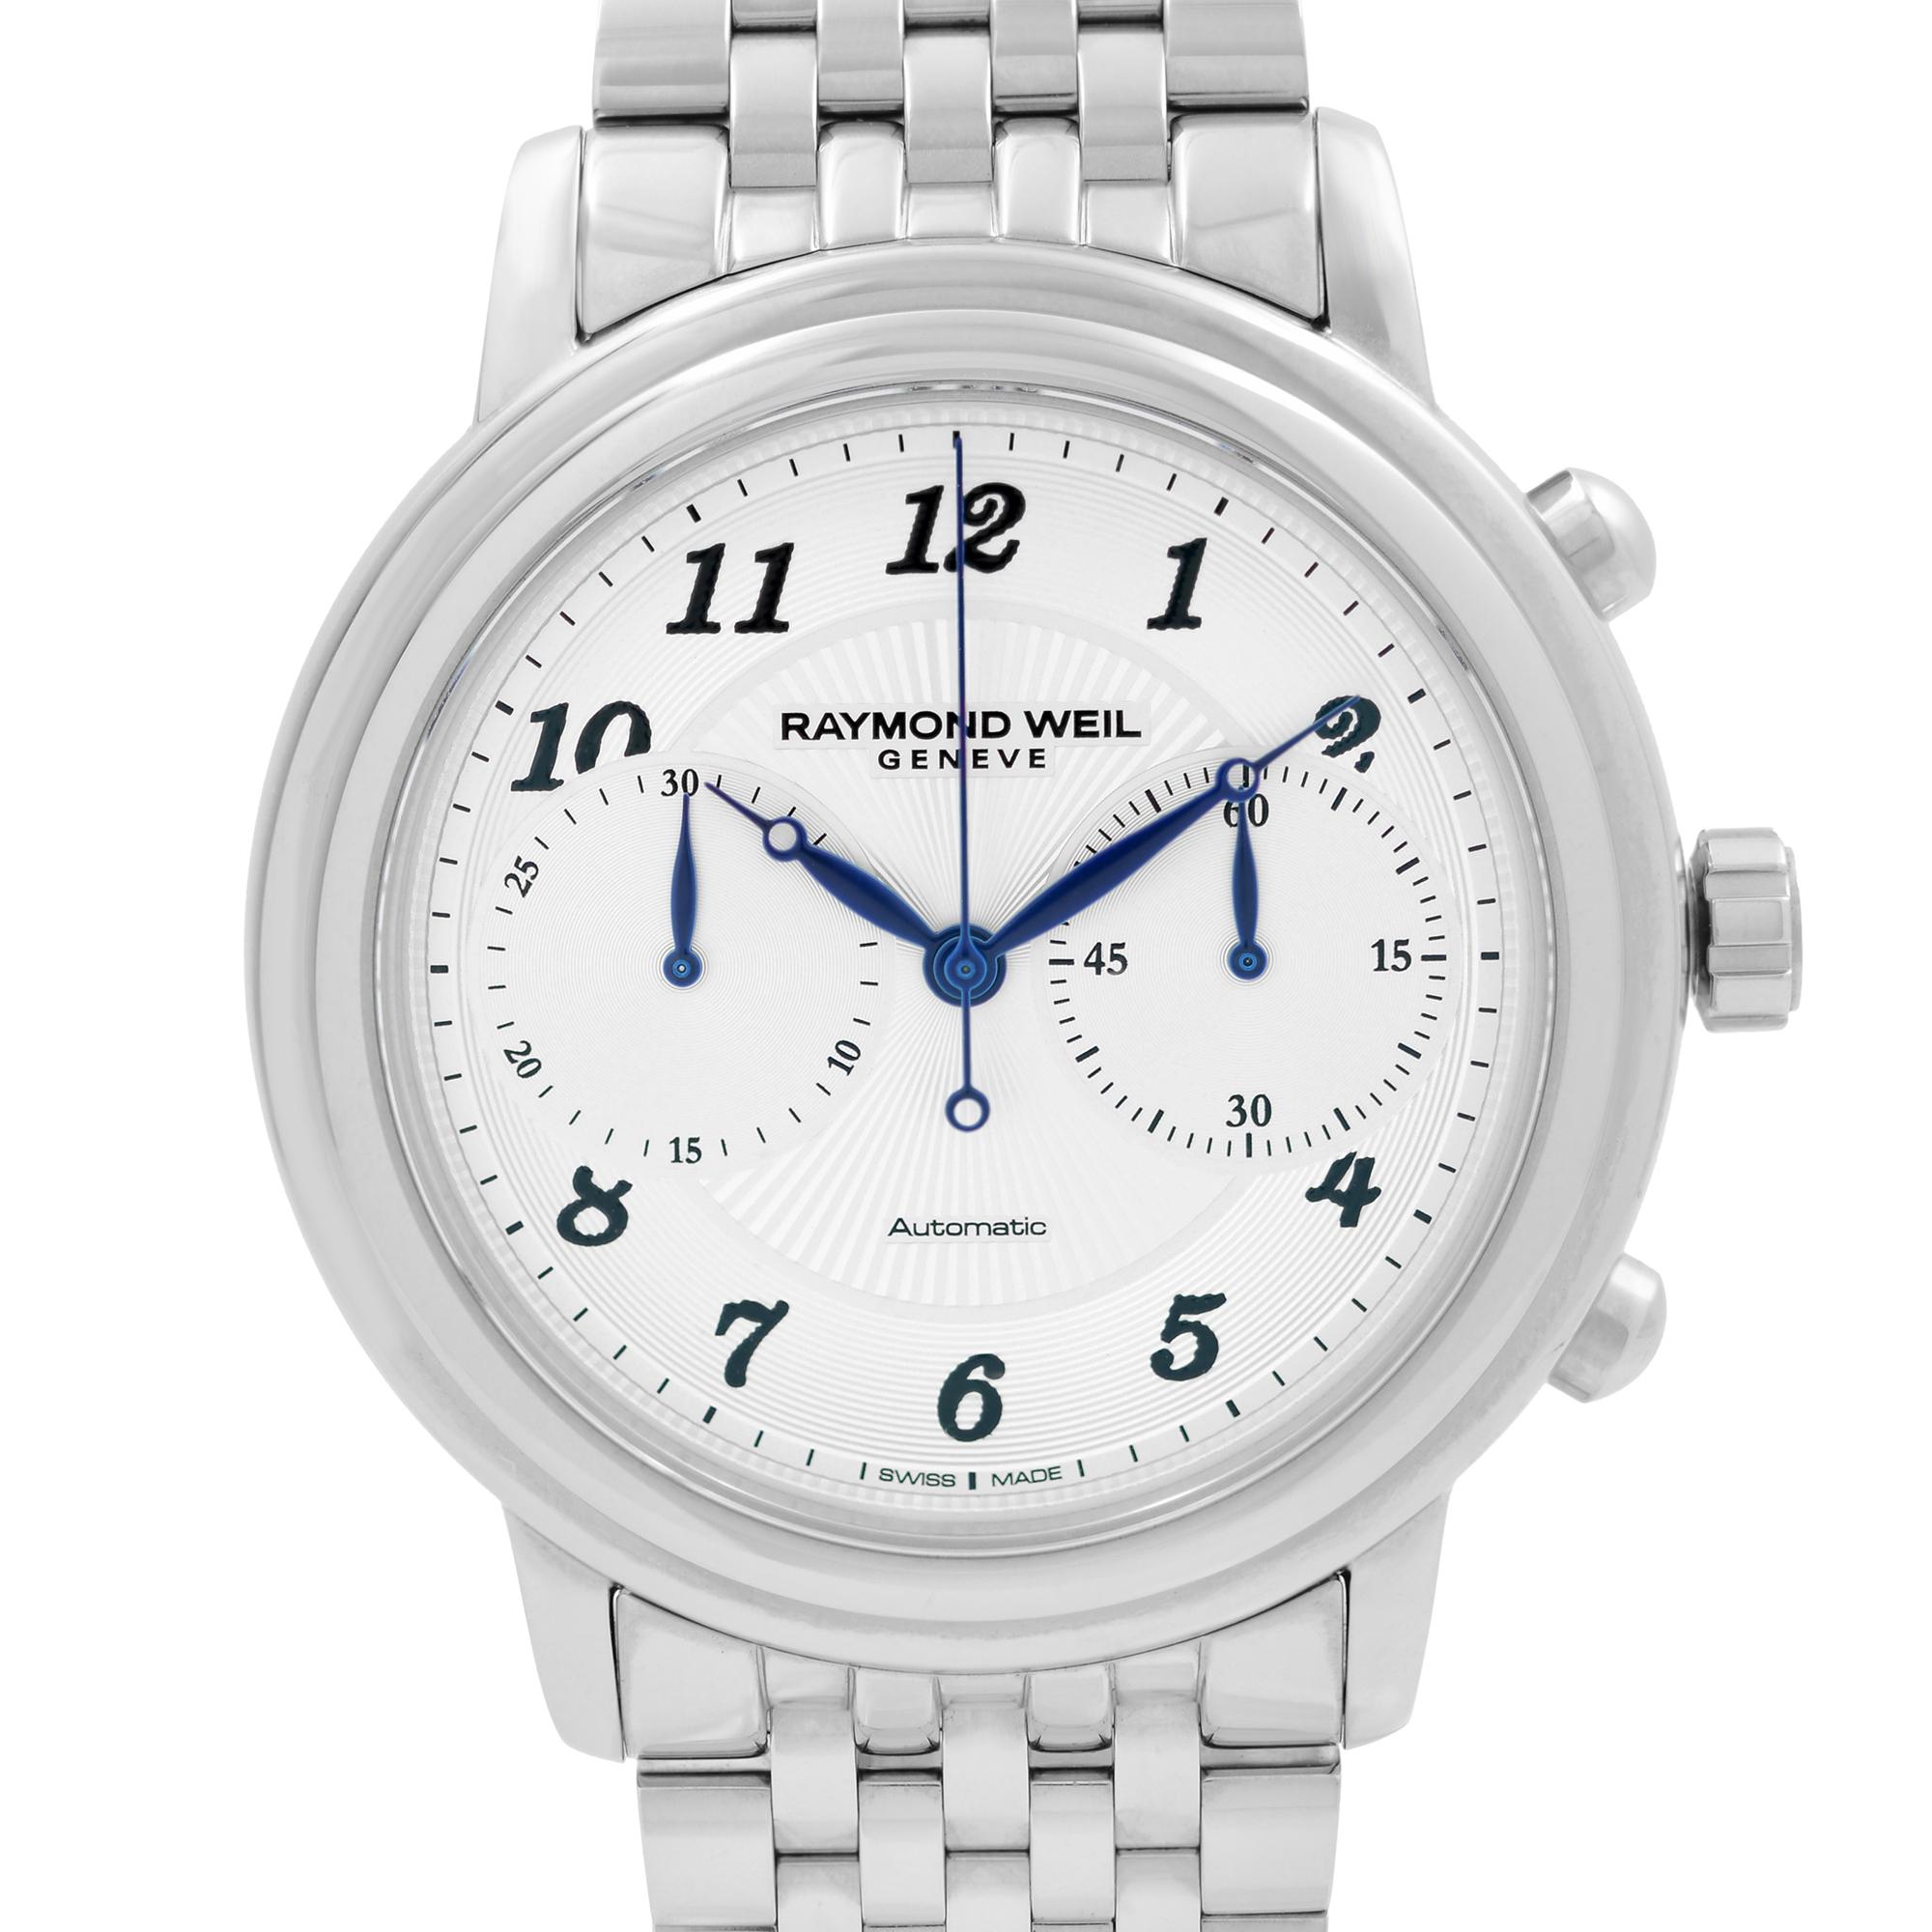 Unworn Raymond Weil Maestro 41.5mm Steel Silver Dial Automatic Men's Watch 4830-ST-05659. This Beautiful Timepiece Features: Stainless Steel Case and Bracelet, Fixed Stainless Steel Bezel, Silver Dial with Blue-Tone Hands, And Arabic Numeral Hour